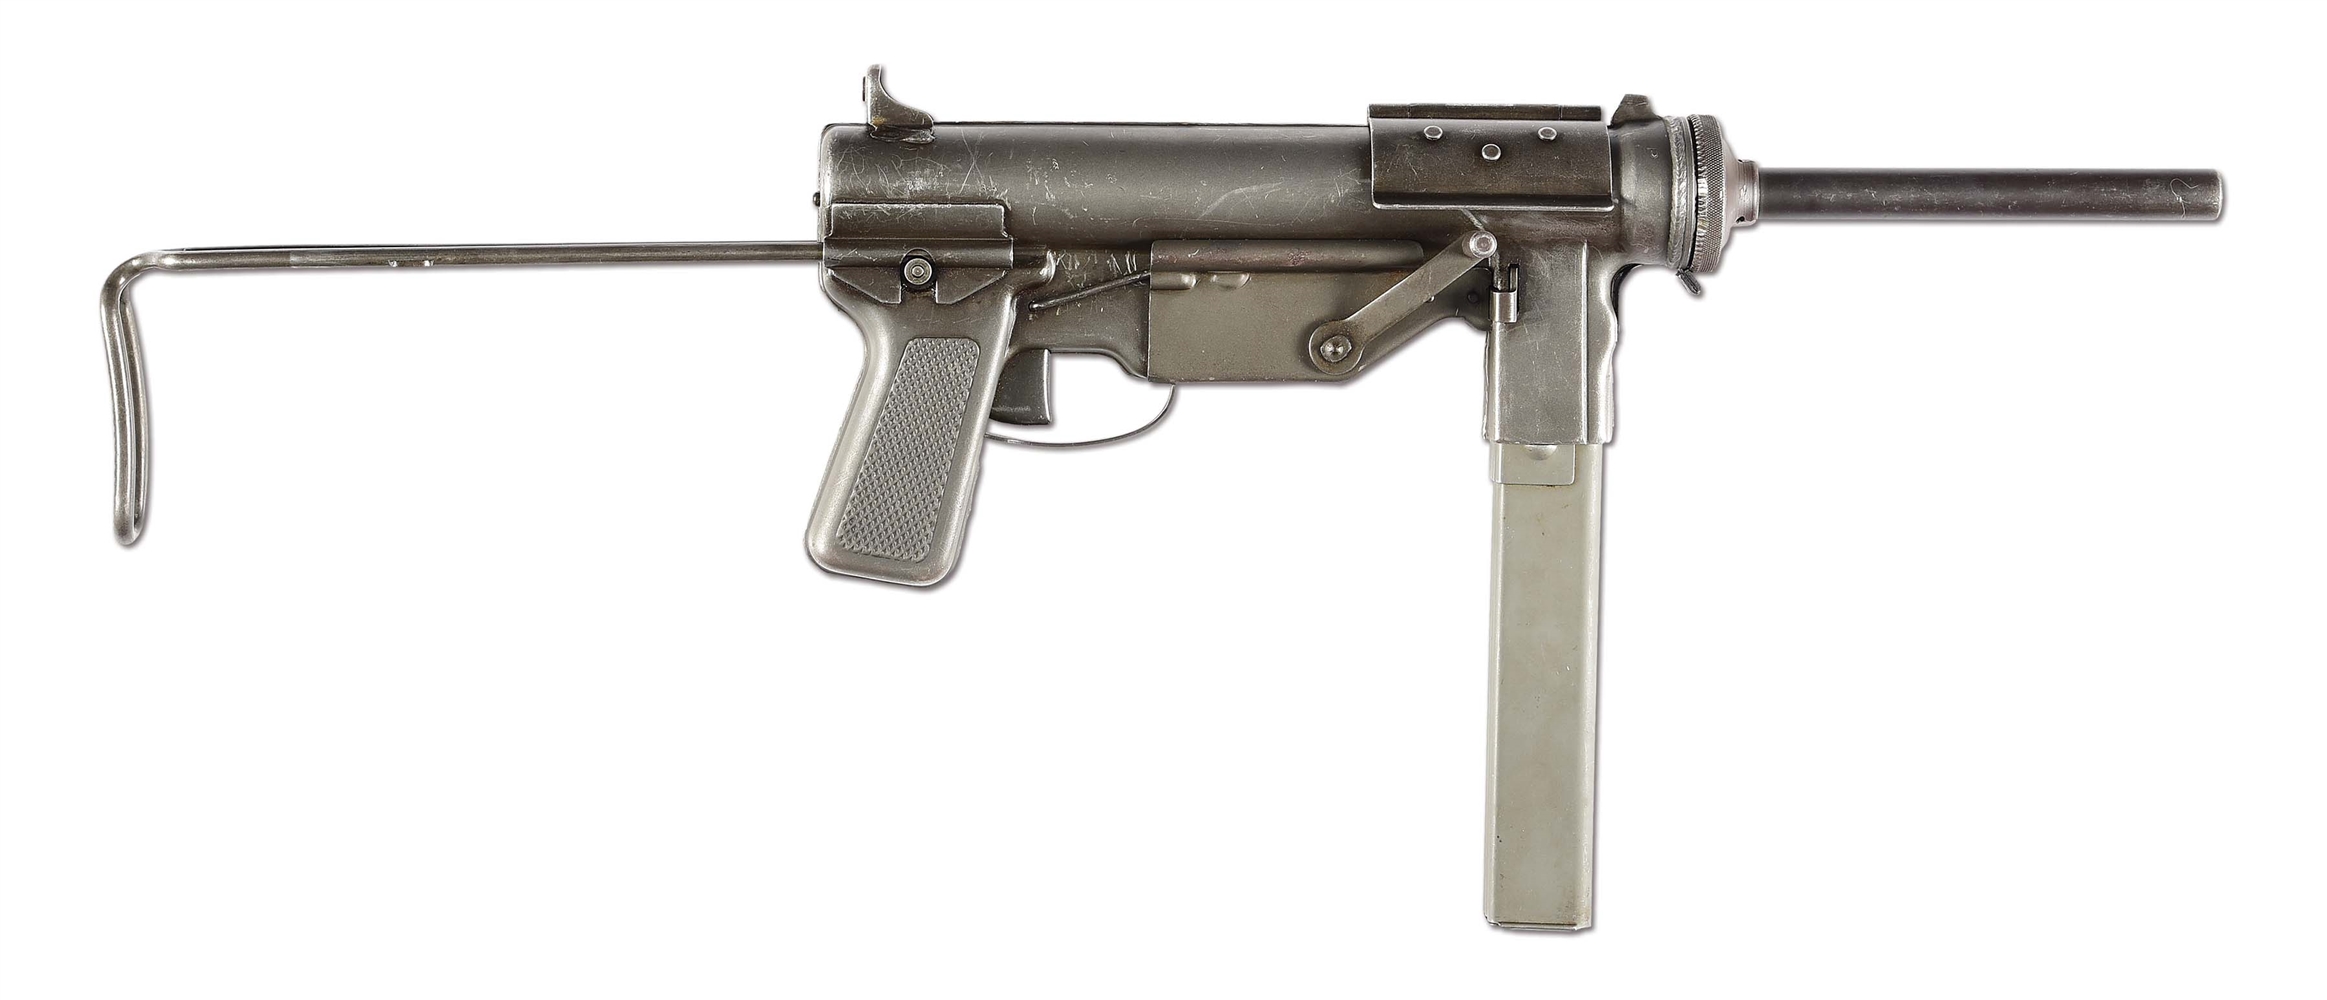 (N) OUTSTANDING EARLY VARIANT ORIGINAL GENERAL MOTORS U.S. GUIDE LAMP MANUFACTURED M3 “GREASE GUN” MACHINE GUN WITH ACCESSORIES (CURIO AND RELIC).